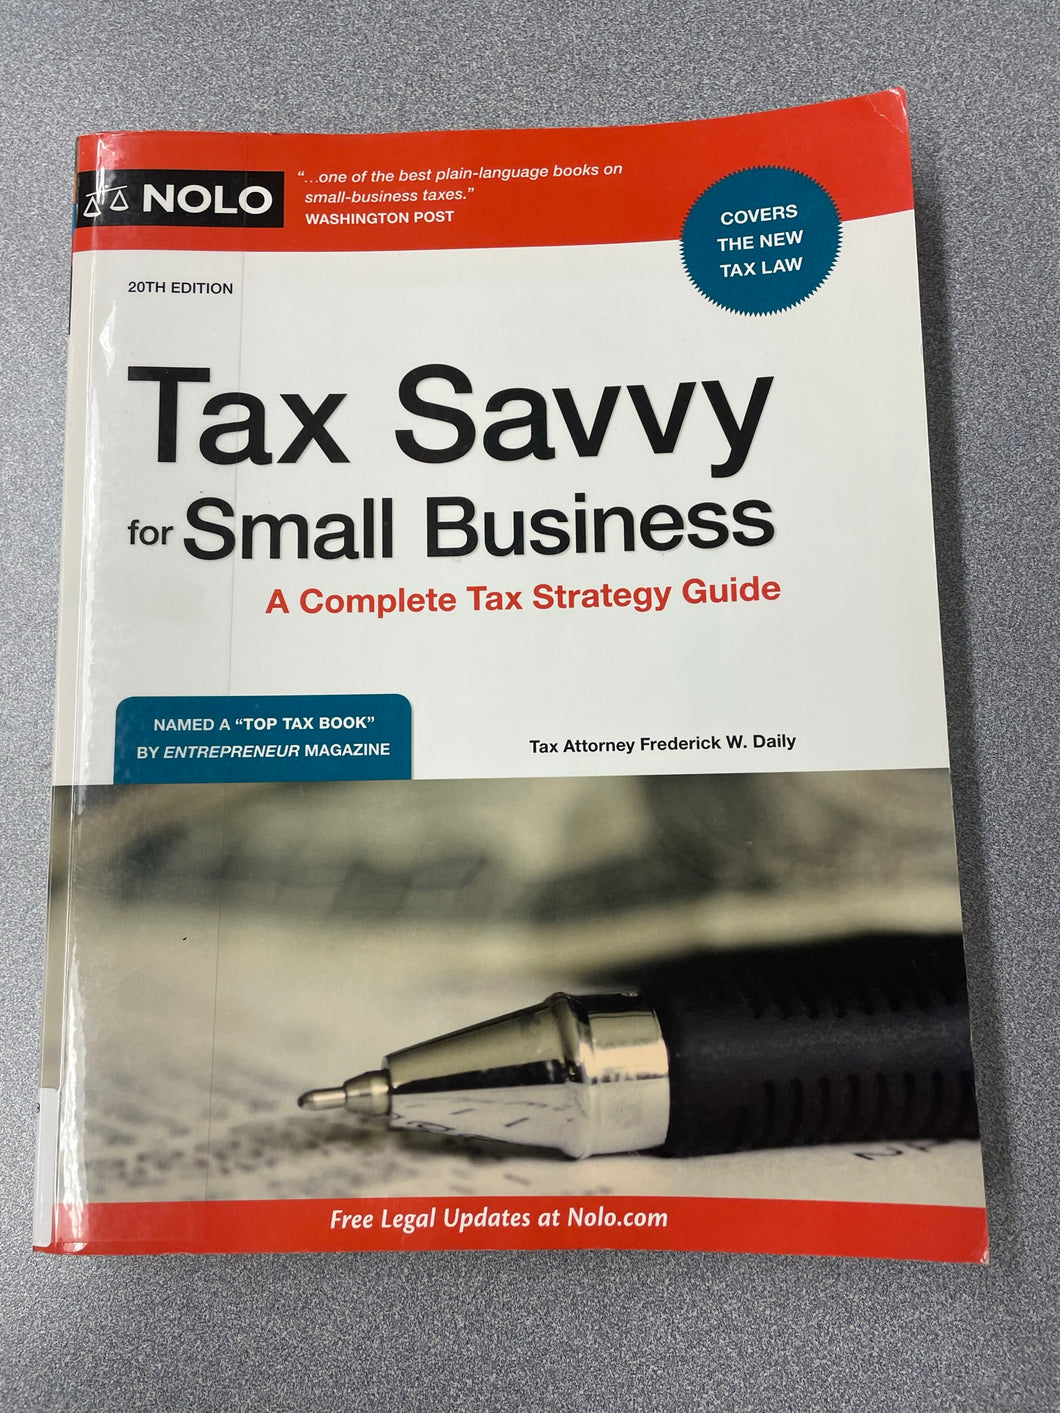 Tax Savvy For Small Business: a Complete Tax Strategy Guide, Daily, Frederick W. [2019] LAW 10/22